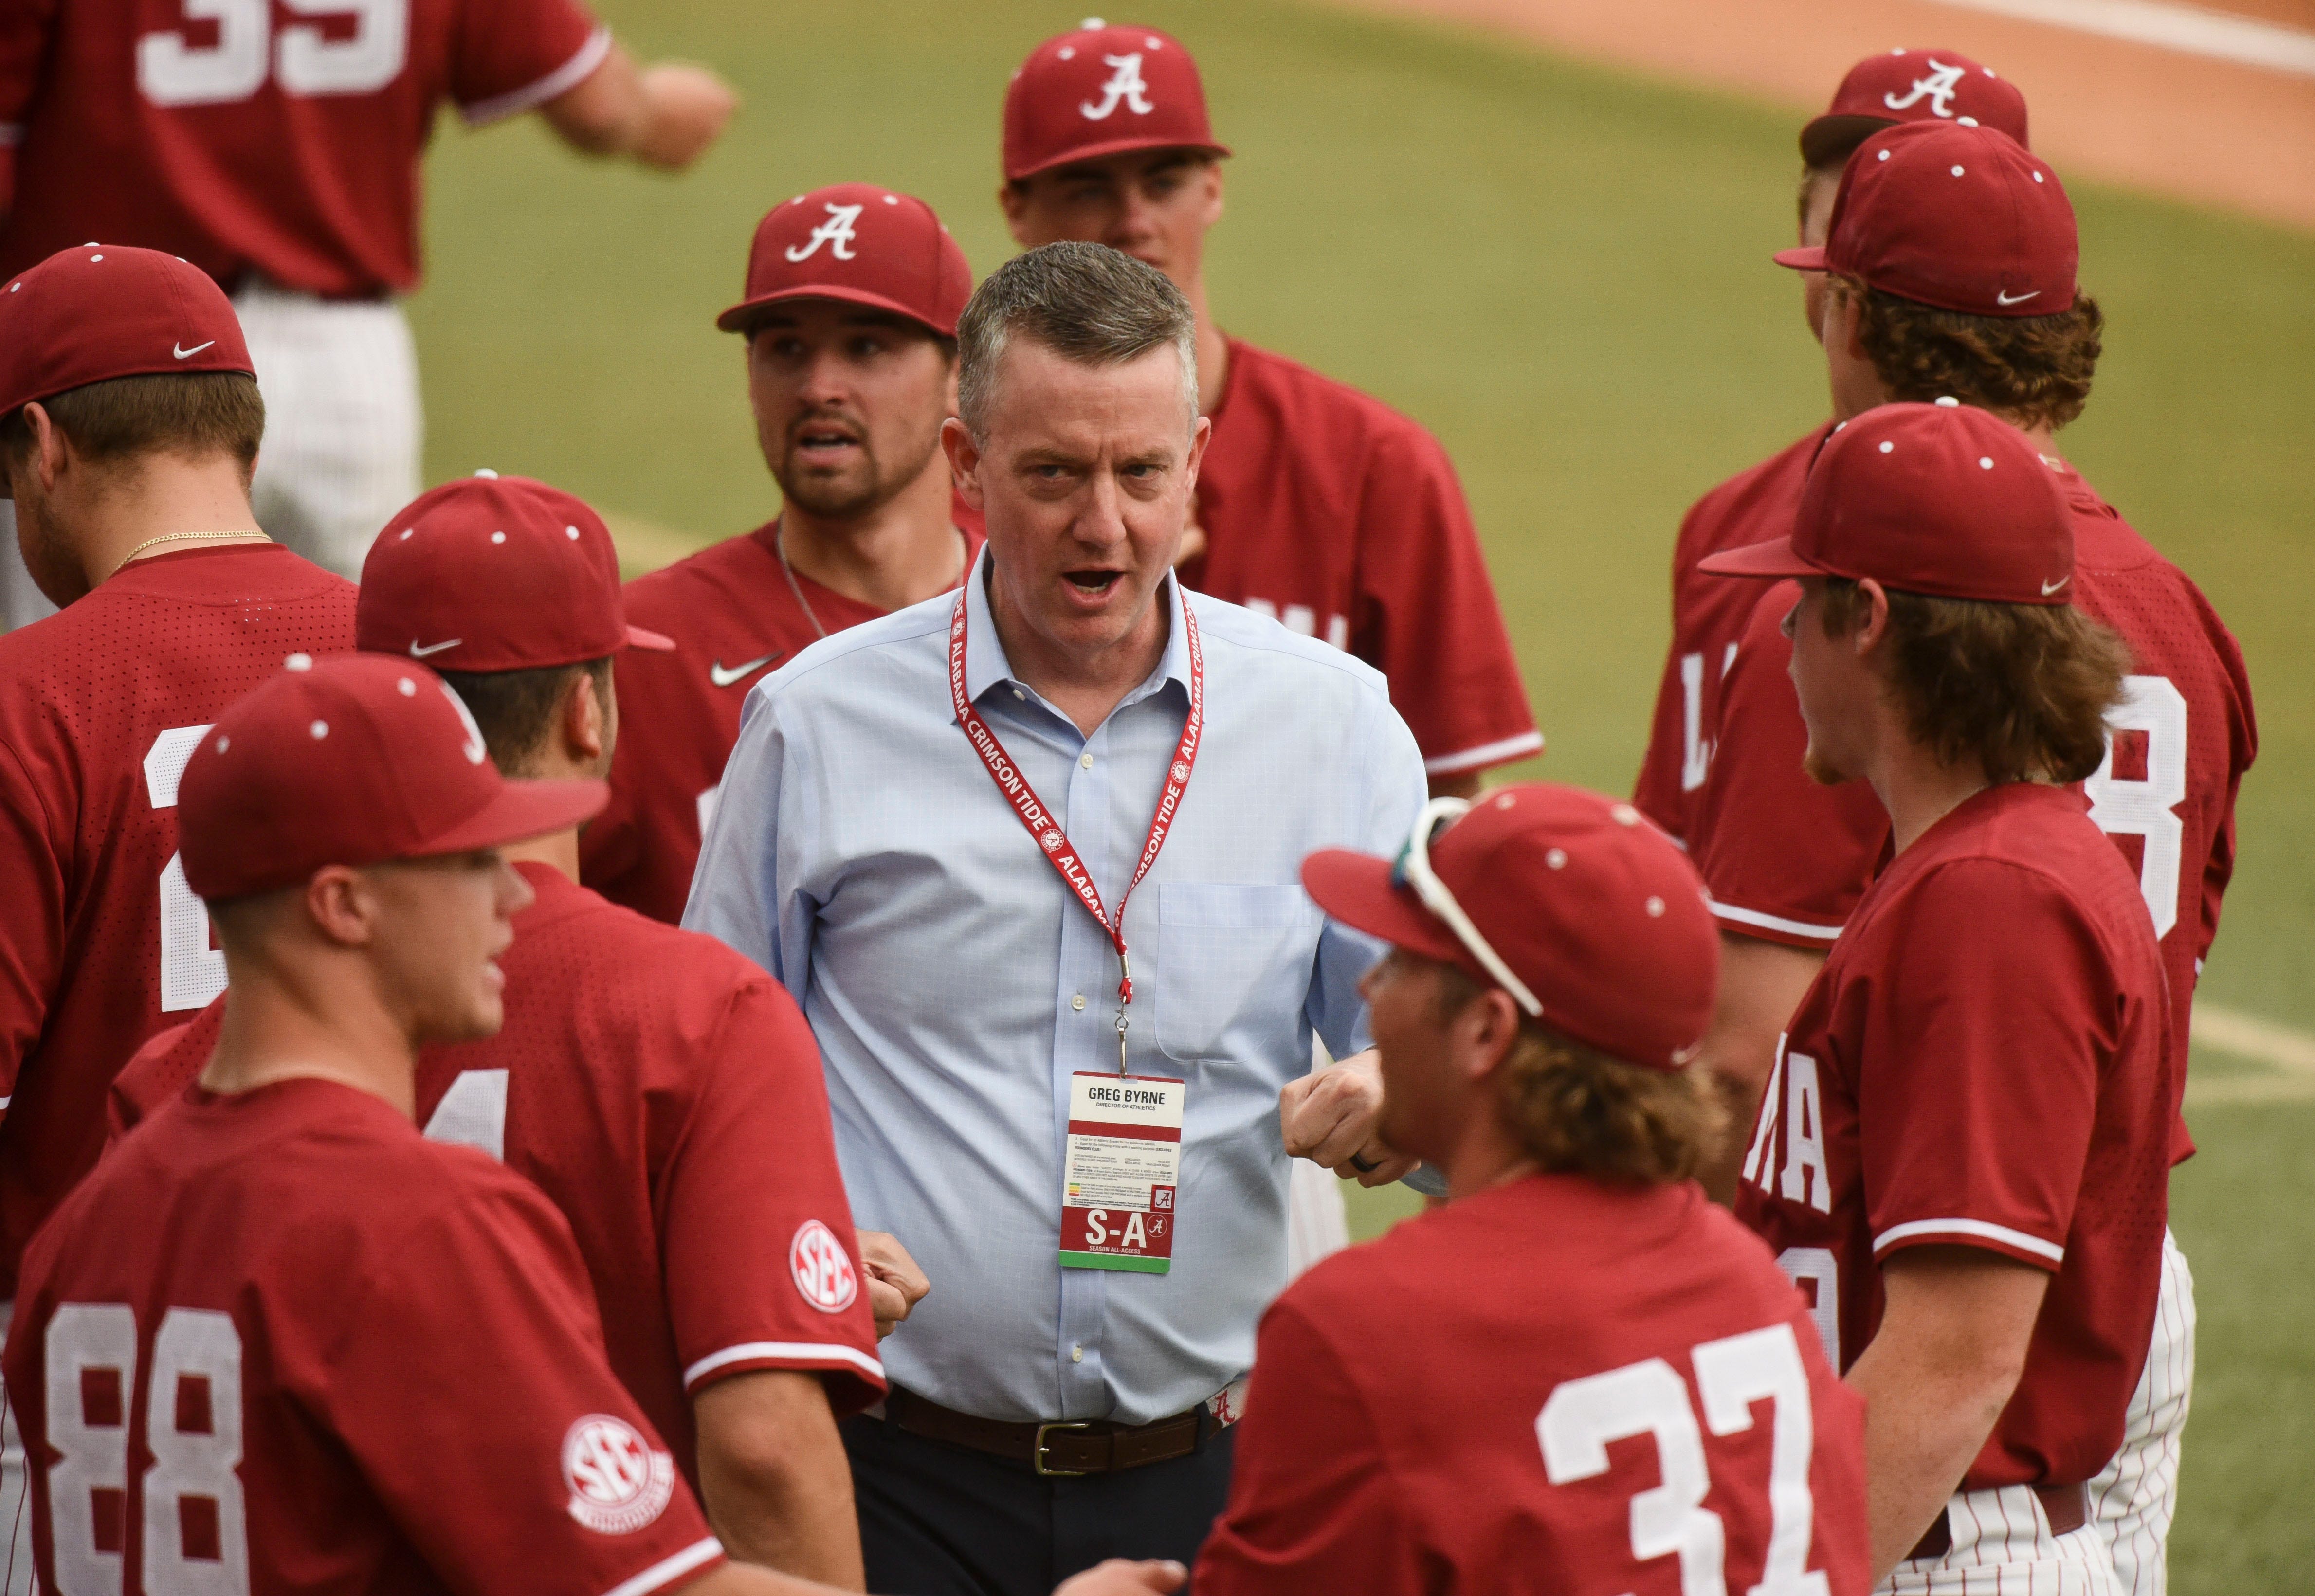 Alabama AD Greg Byrne discusses ongoing baseball investigation